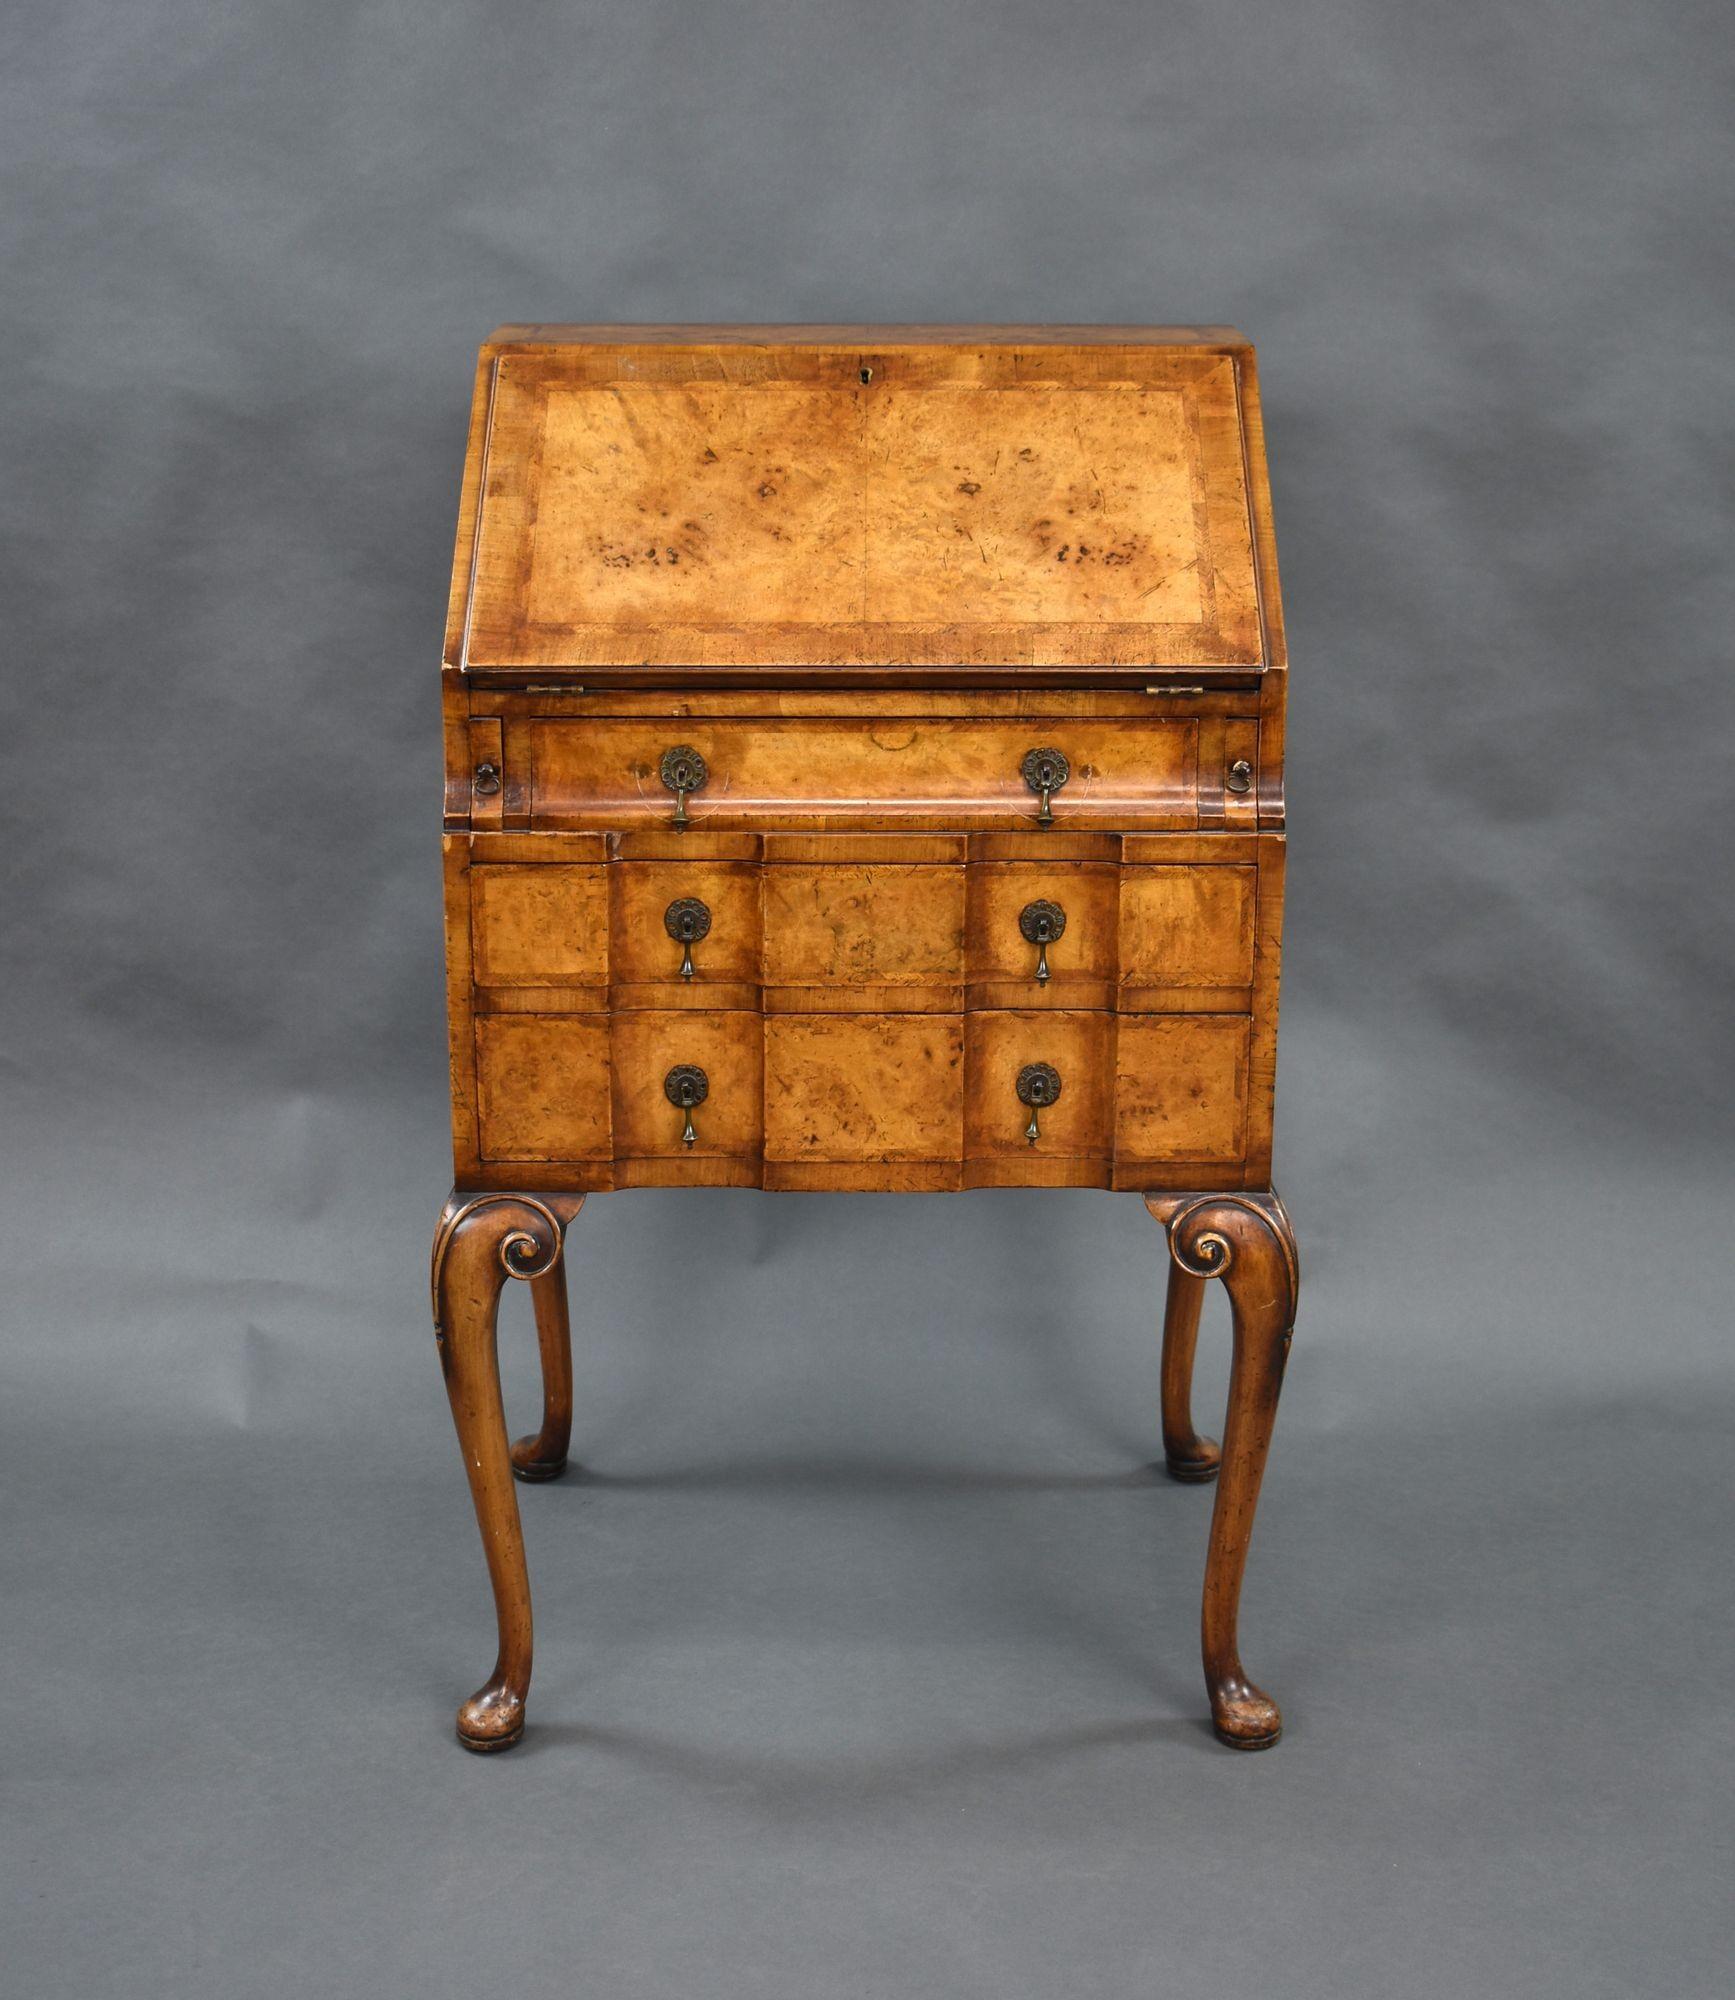 For sale is a good quality antique figured walnut bureau, having a fall front opening to a fitted interior, above three oak lined drawers, standing on elegant cabriole legs the bureau remains in very good condition, showing minor signs of wear